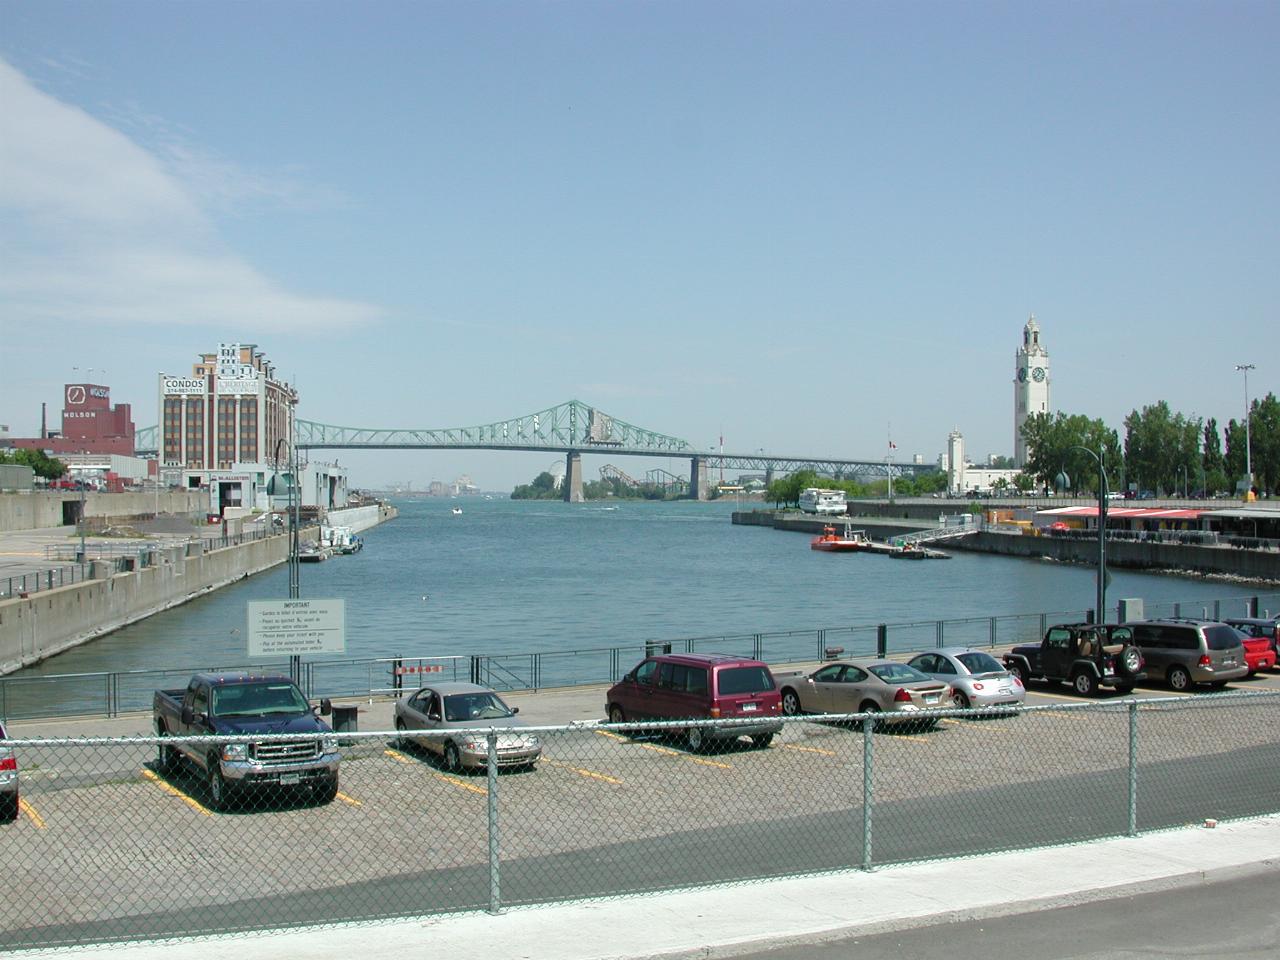 Pont Jacques Cartier, as seen from harbour basin